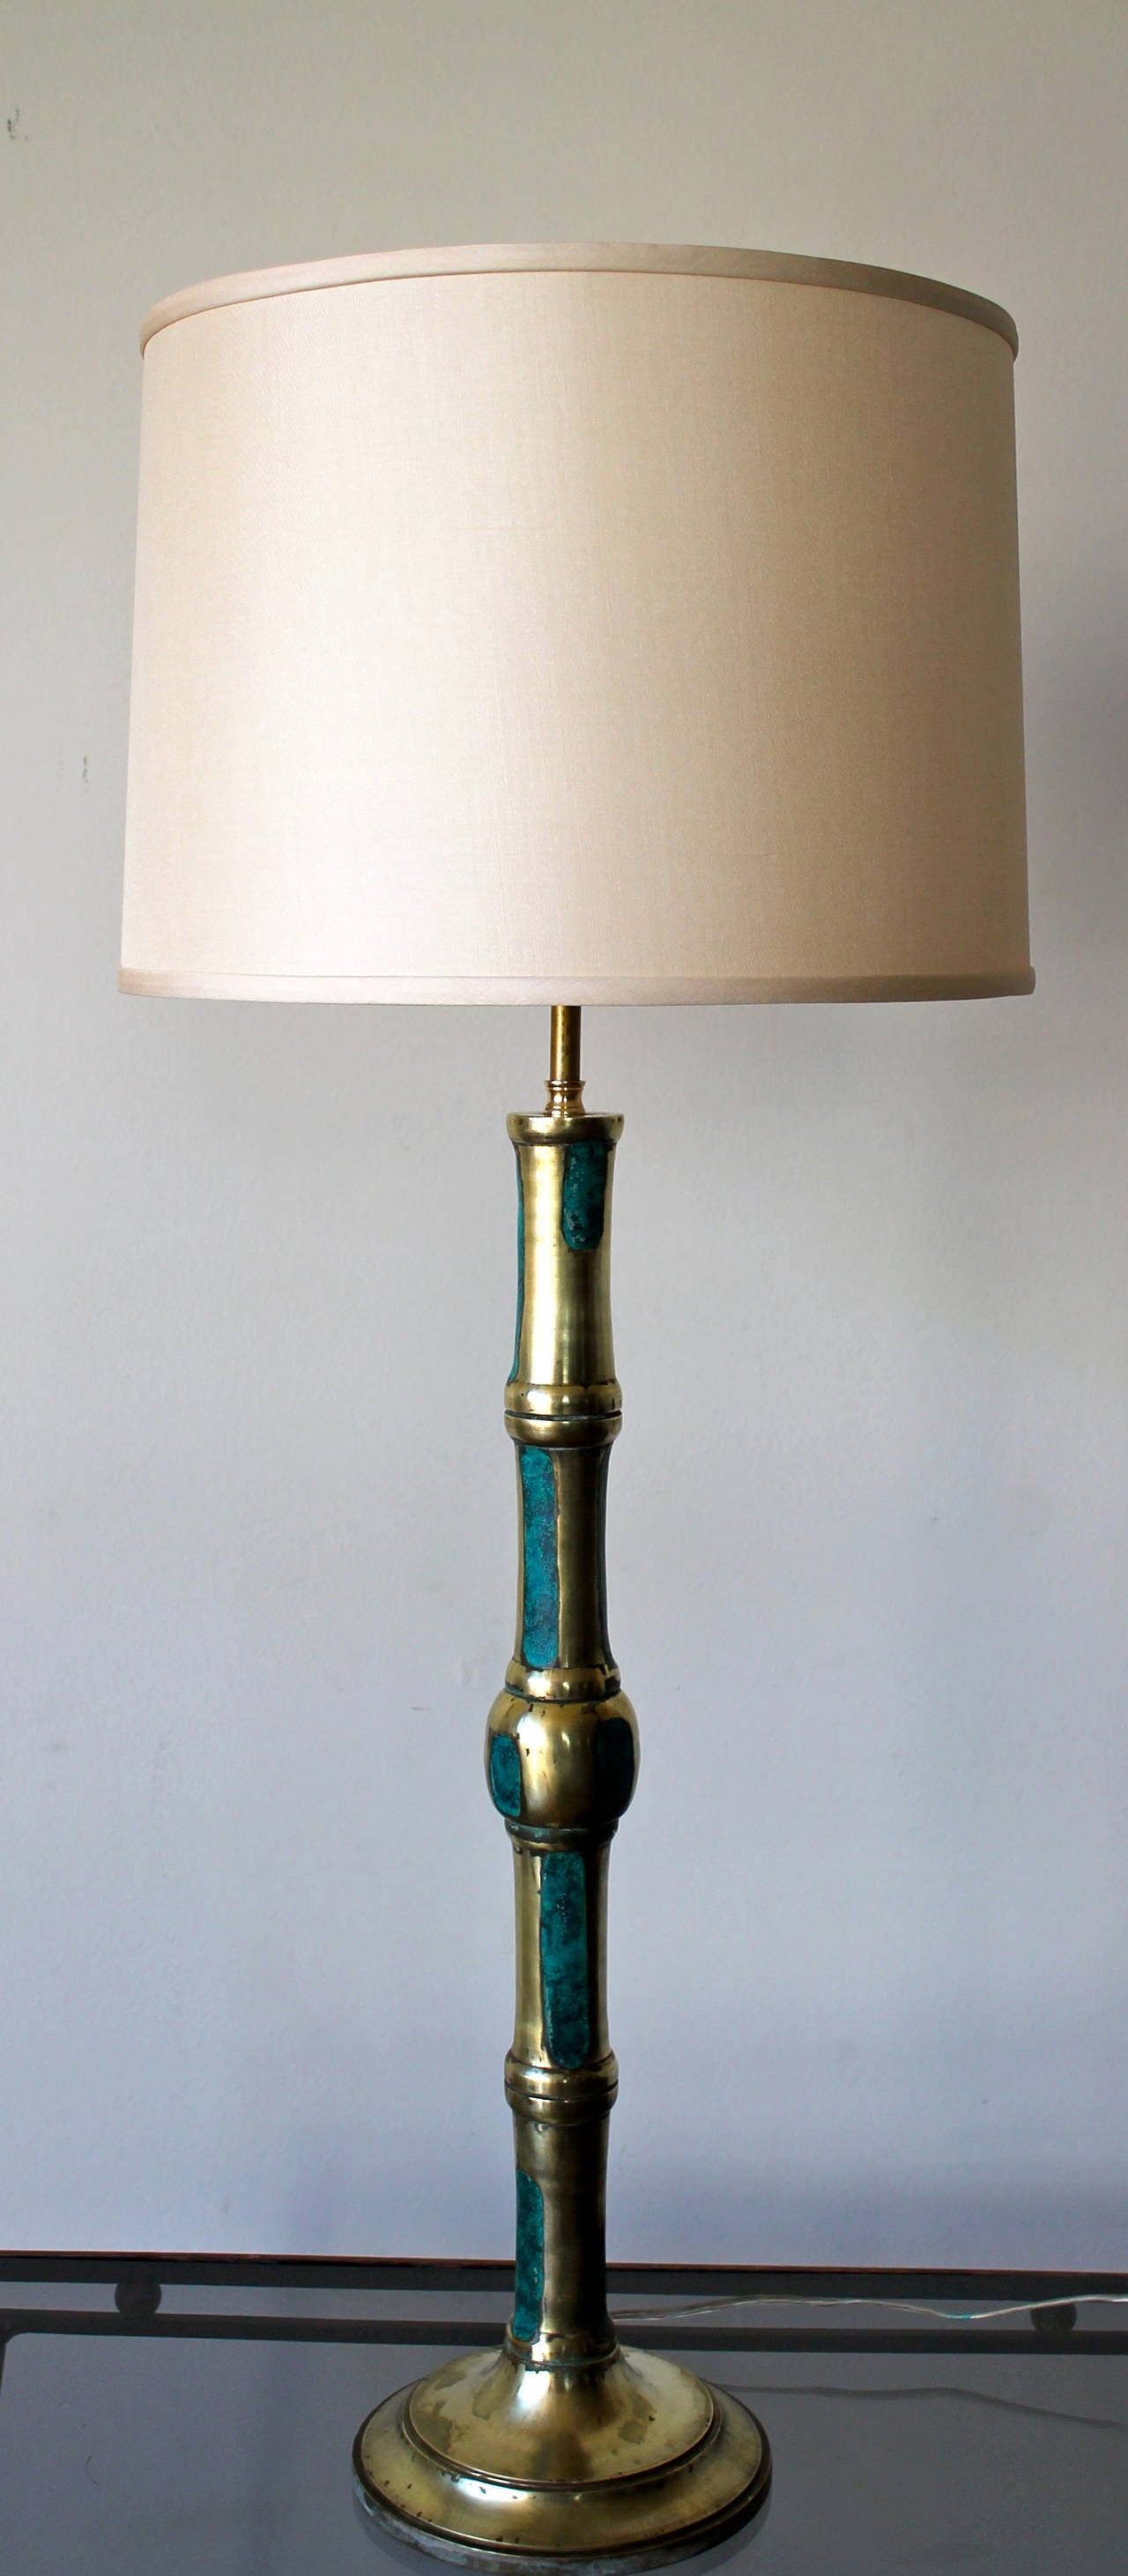 Beautiful and rare set of two bamboo cast brass table lamps with ceramic turquoise inlay.
By Pepe Mendoza.
Mexico City, 1959.
Each lamp is signed Pepe Mendoza, Mexico.
Completely restored and rewired.
Brand new silk shade lamps made in USA.